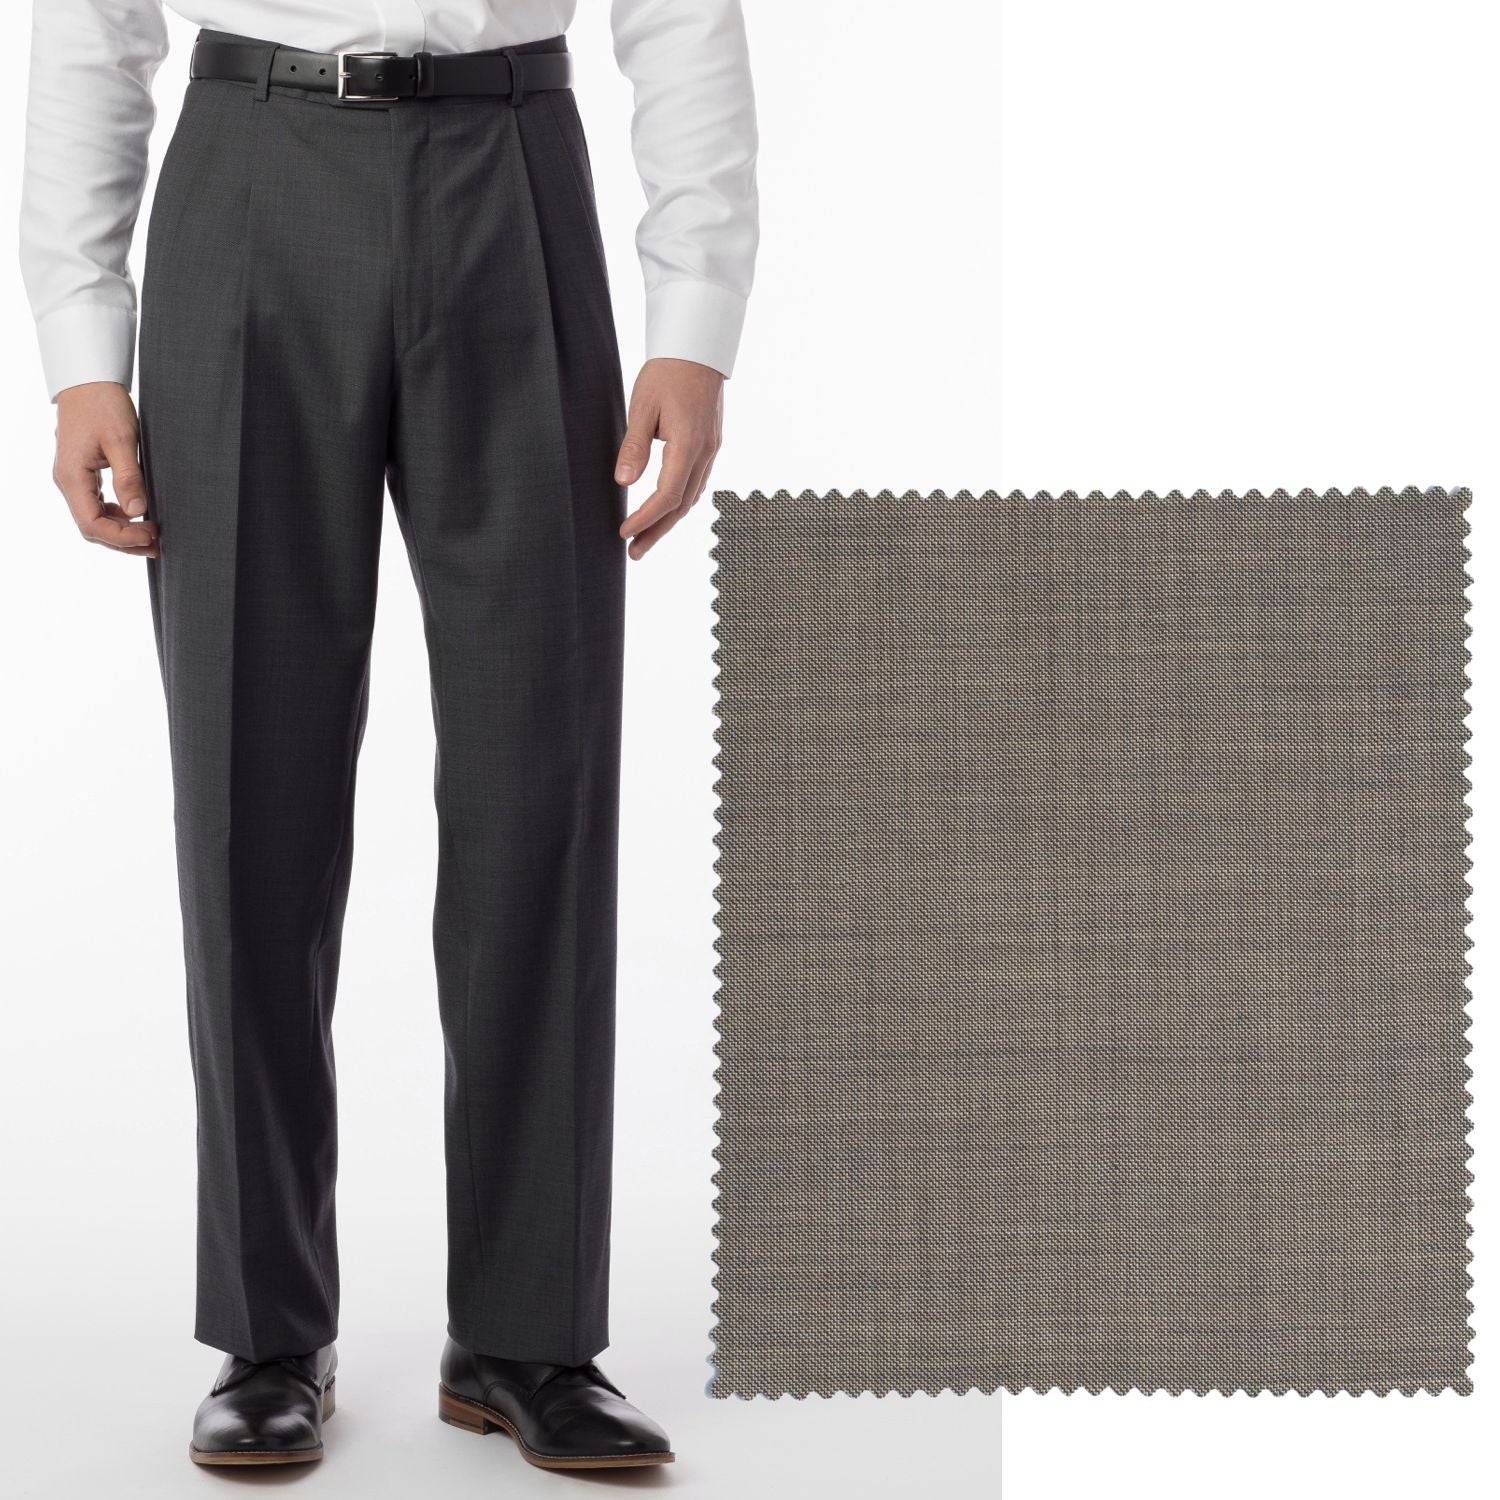 BIG FIT Sharkskin Super 120s Worsted Wool Comfort-EZE Trouser in British Tan (Manchester Pleated Model) by Ballin